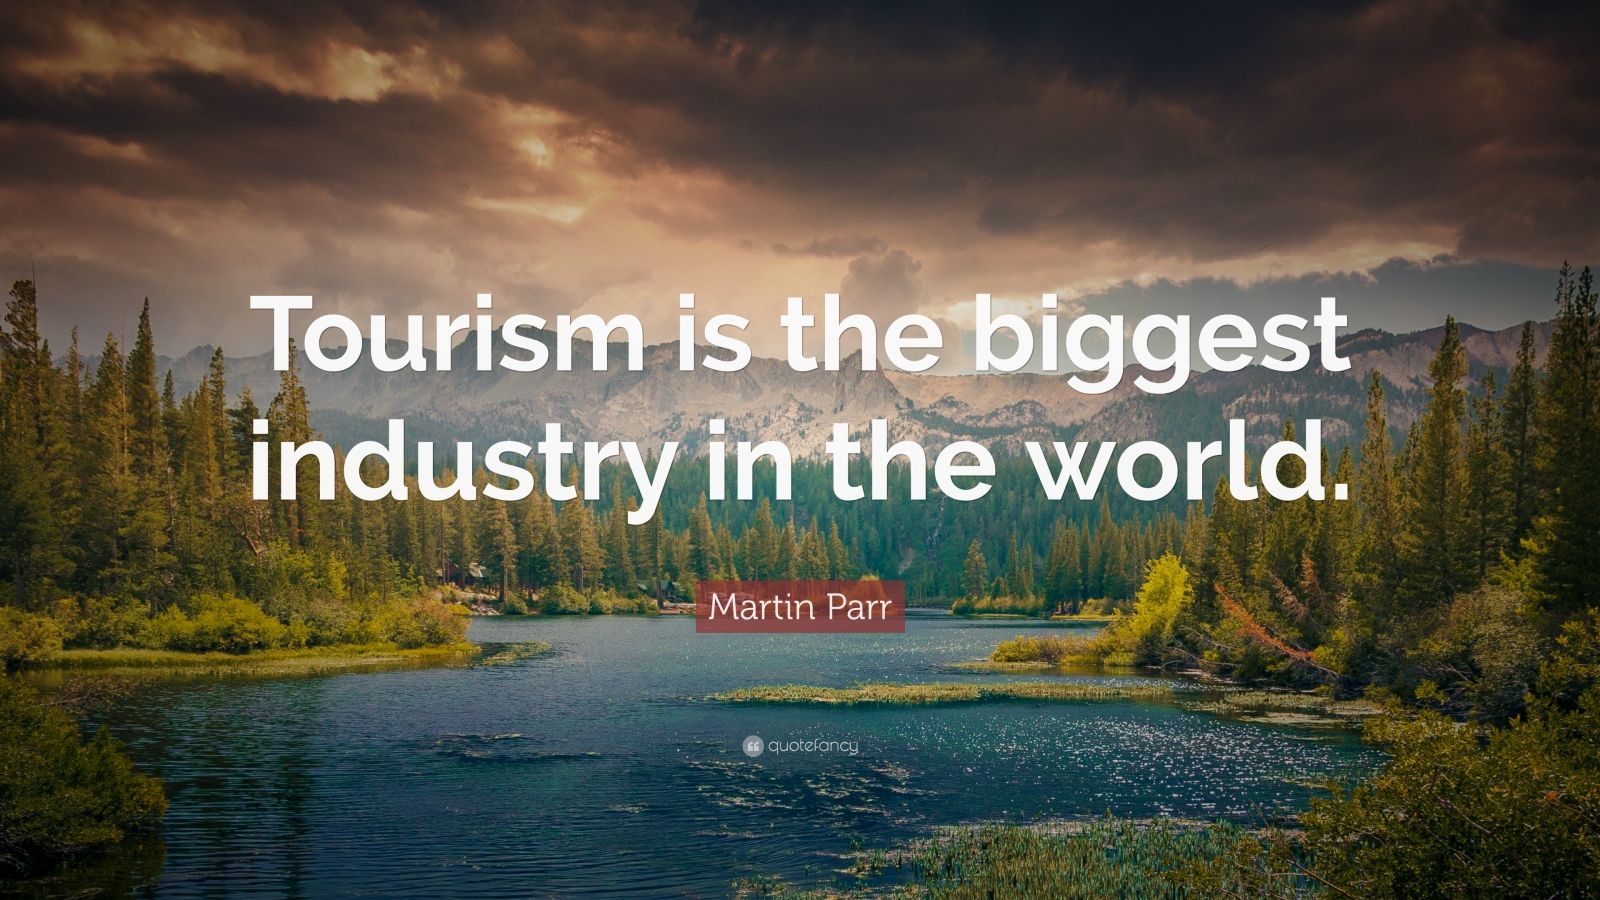 international tourism is the biggest industry in the world